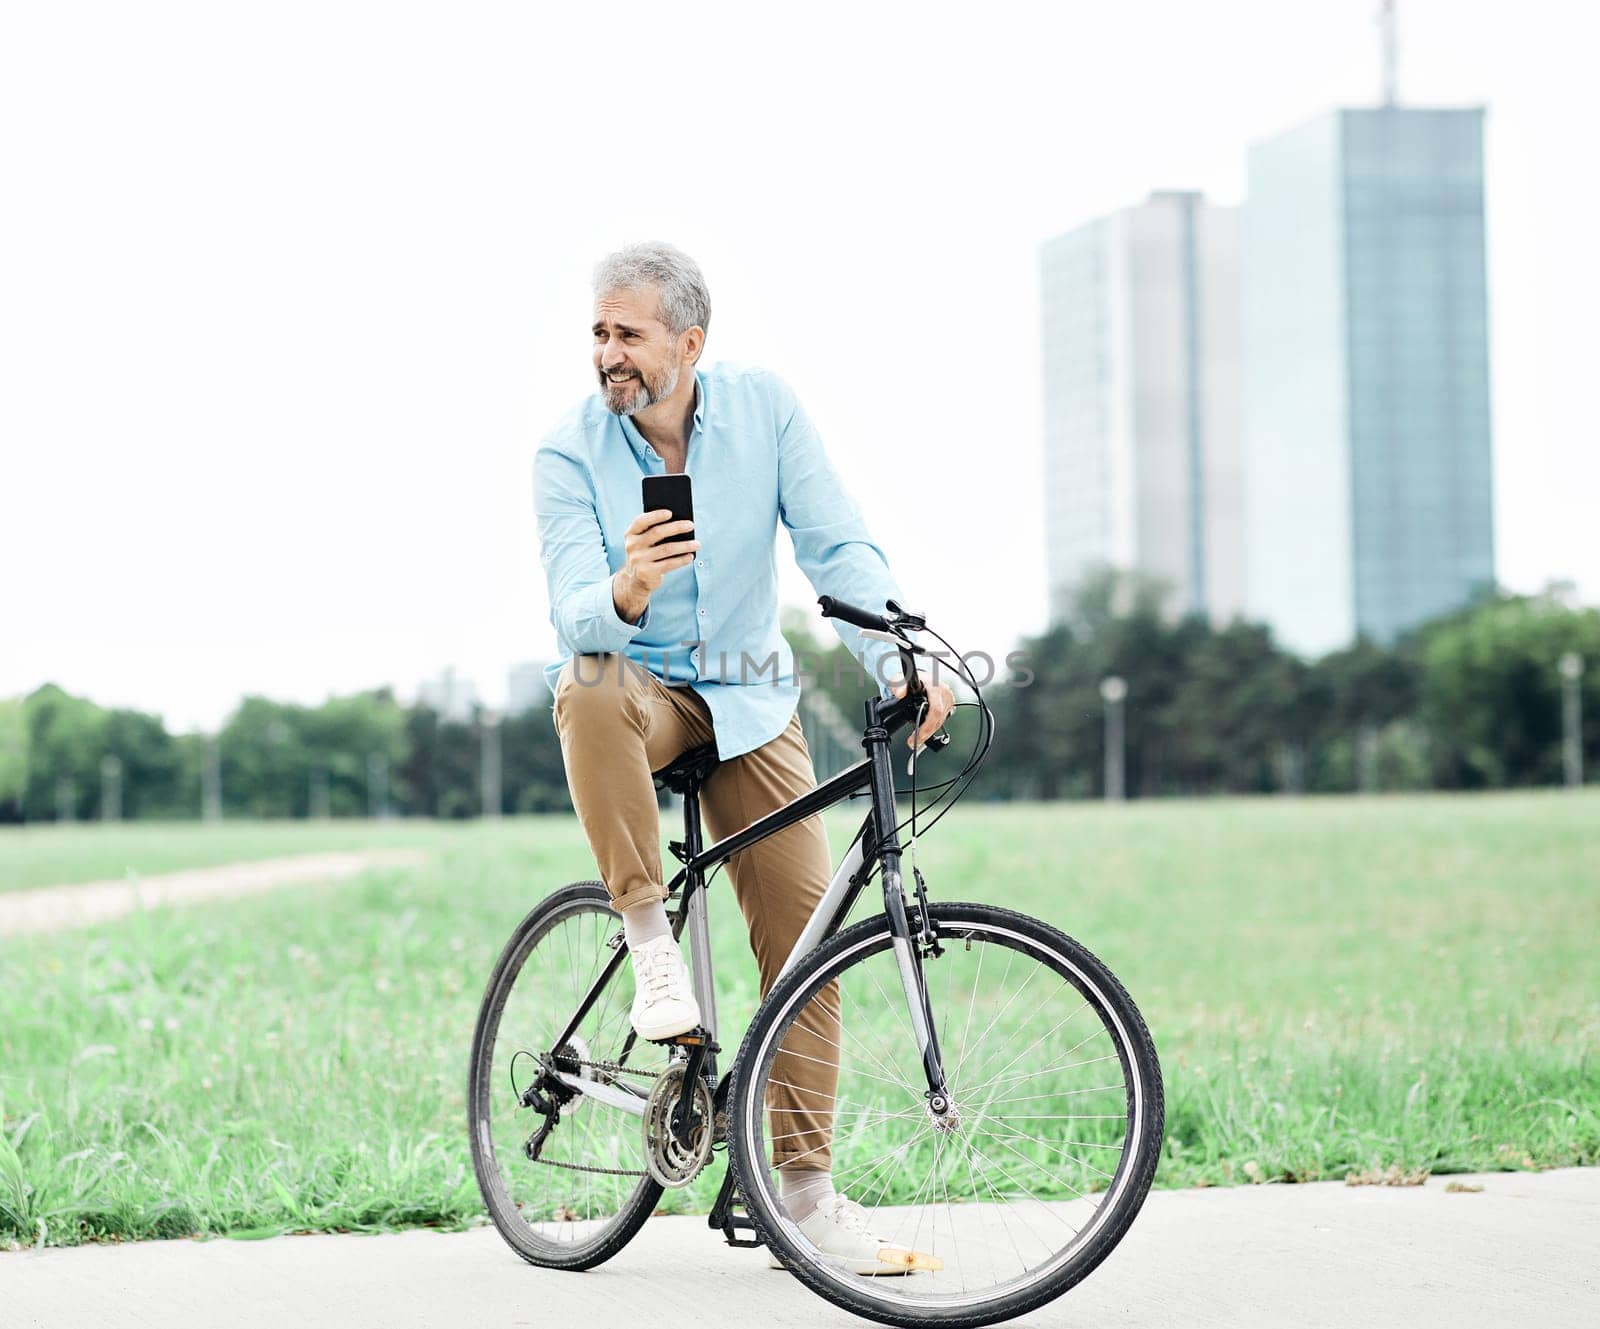 portrait of a senior man on bicycle using a cell phone in the city